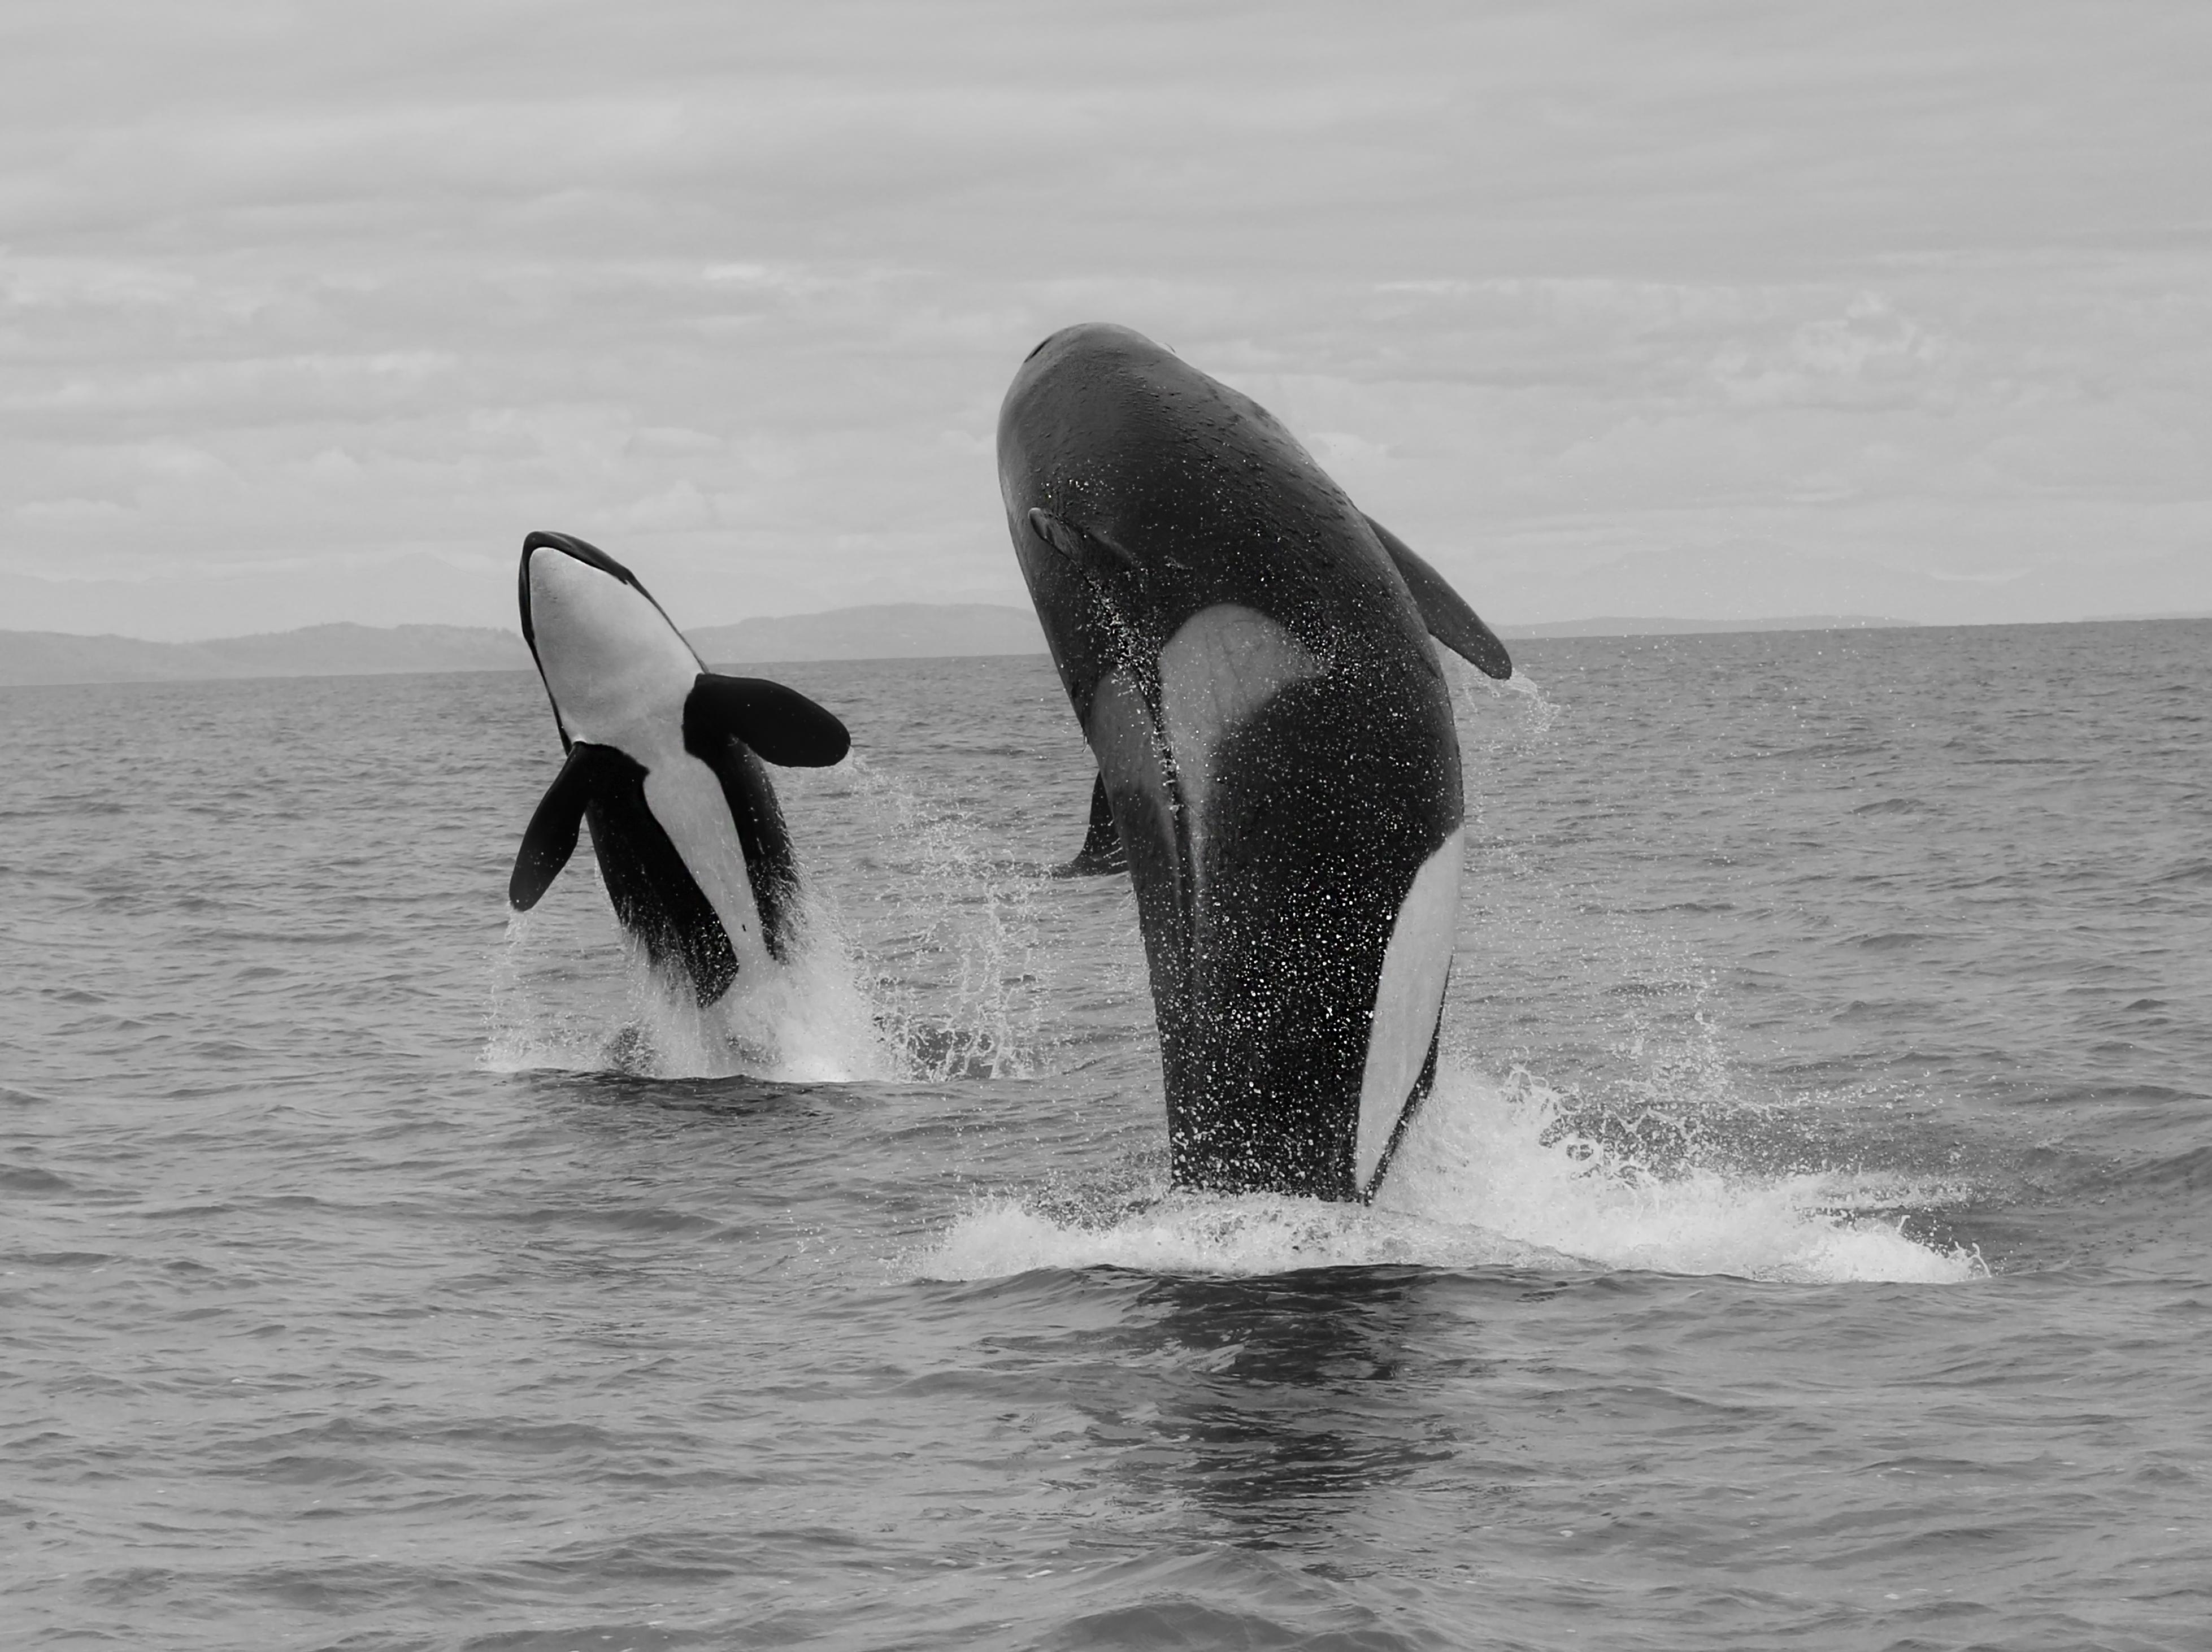 Shane Russeck Black and White Photograph - "Orca Double Breach" 50x60 Black and White, Killer Whale Photography Unisgned